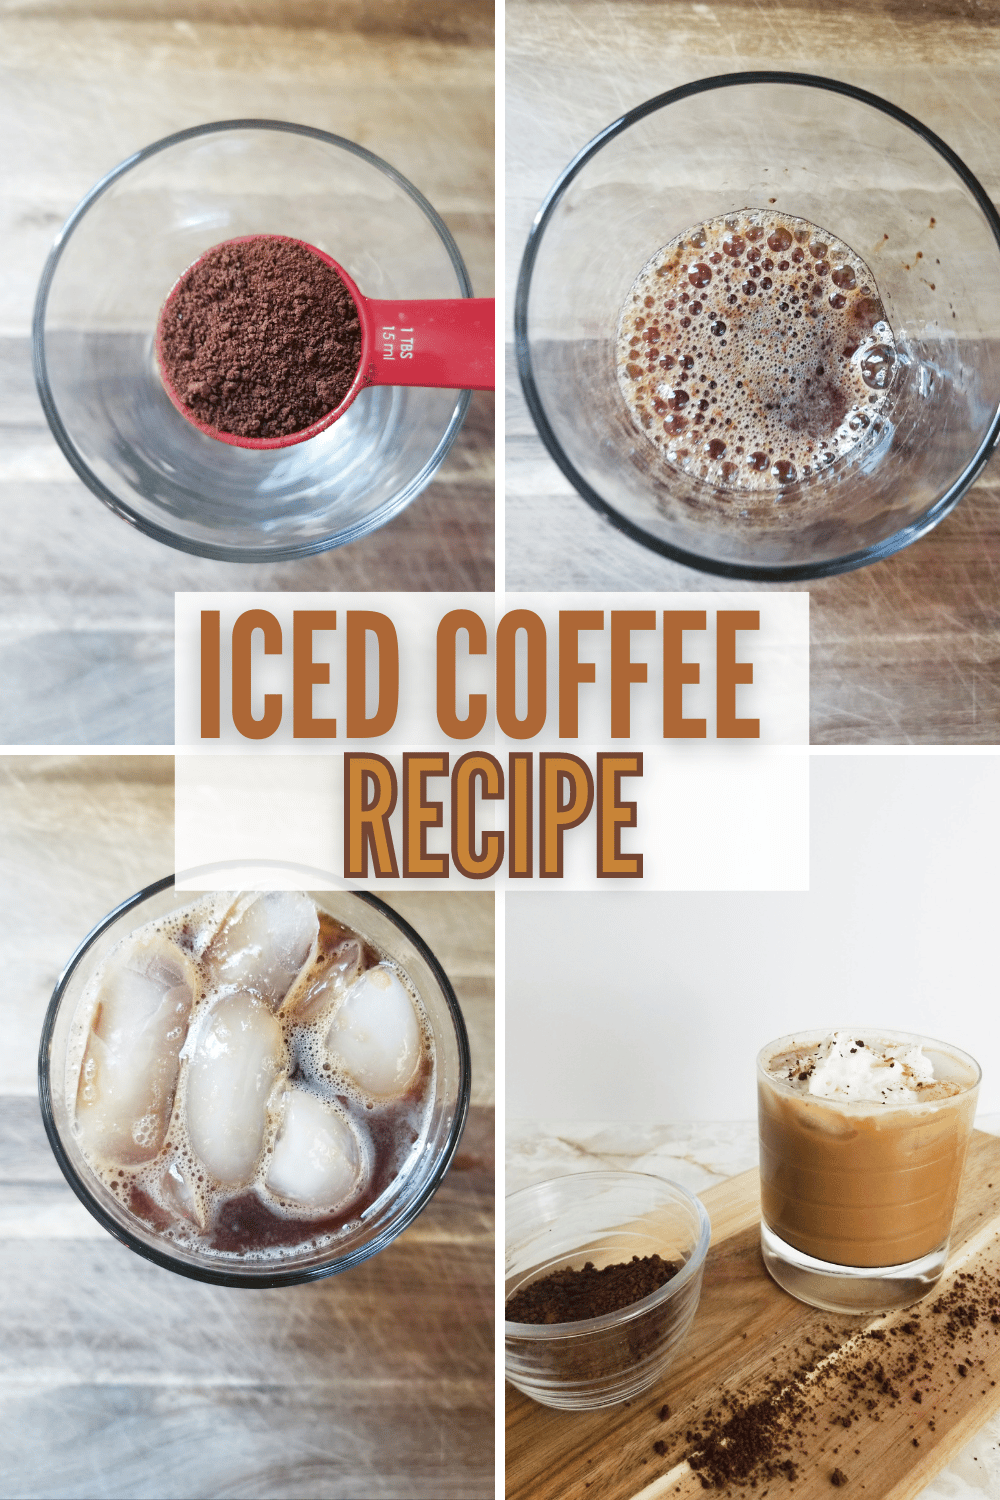 This Iced Coffee recipe is the perfect way to cool off on a hot summer day! When you want a refreshing iced coffee, try this recipe! #icedcoffeerecipe #icedcoffee #coffee #recipe via @wondermomwannab